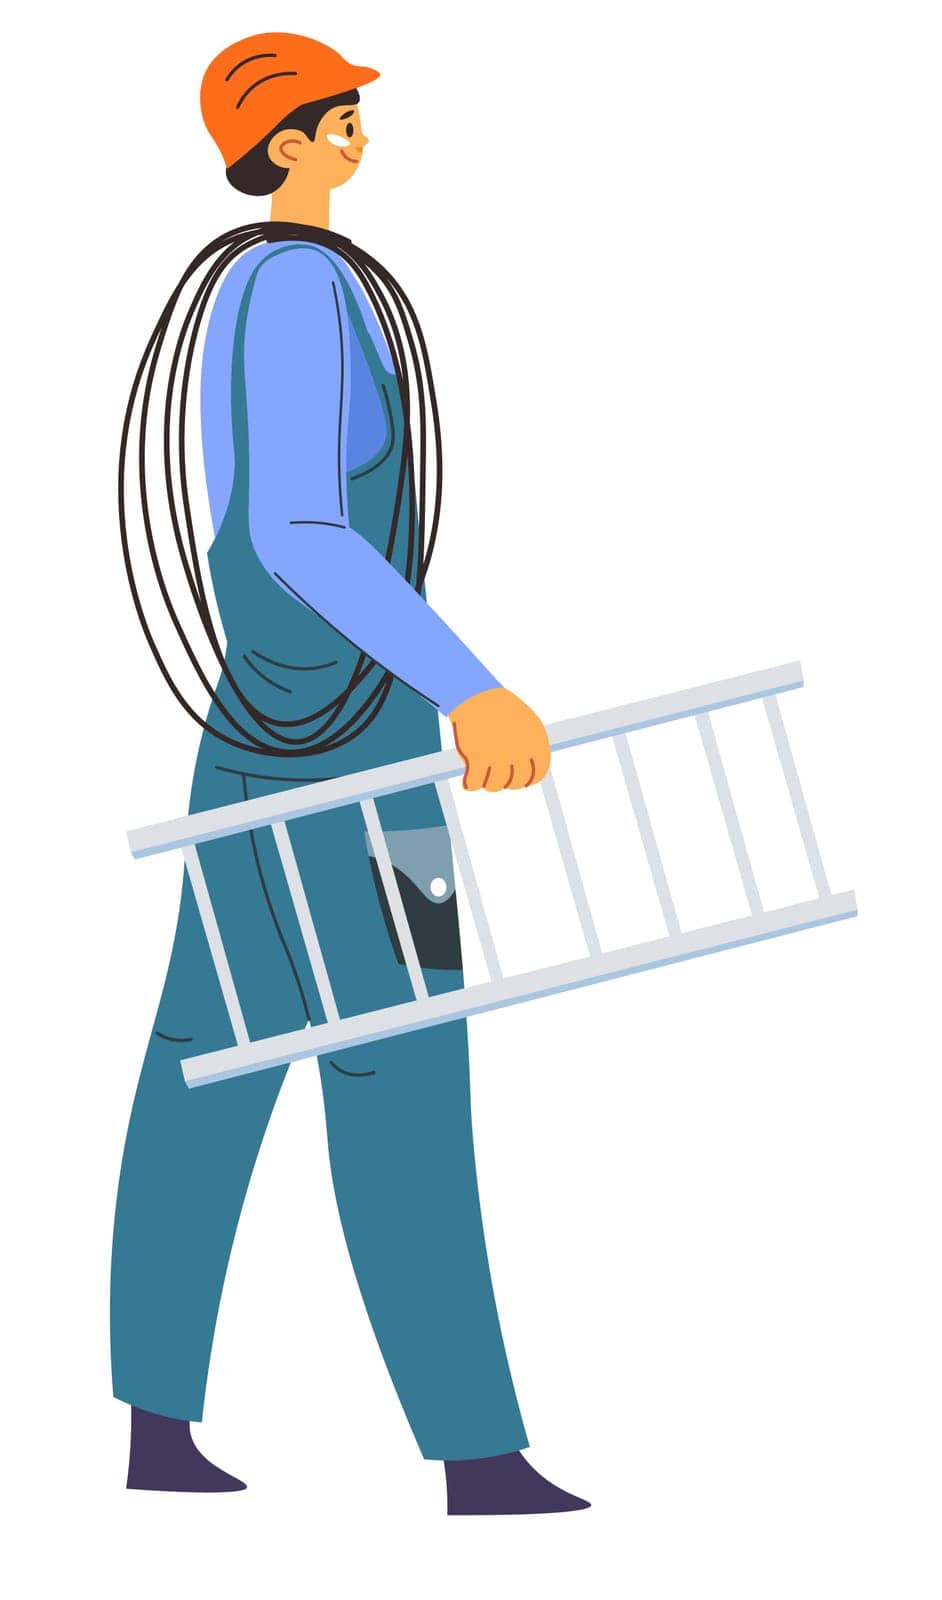 Specialist wearing uniform and protective helmet carrying ladder and wire cables in hands. Male character electrician maintaining system and fixing break downs. Vector in flat style illustration